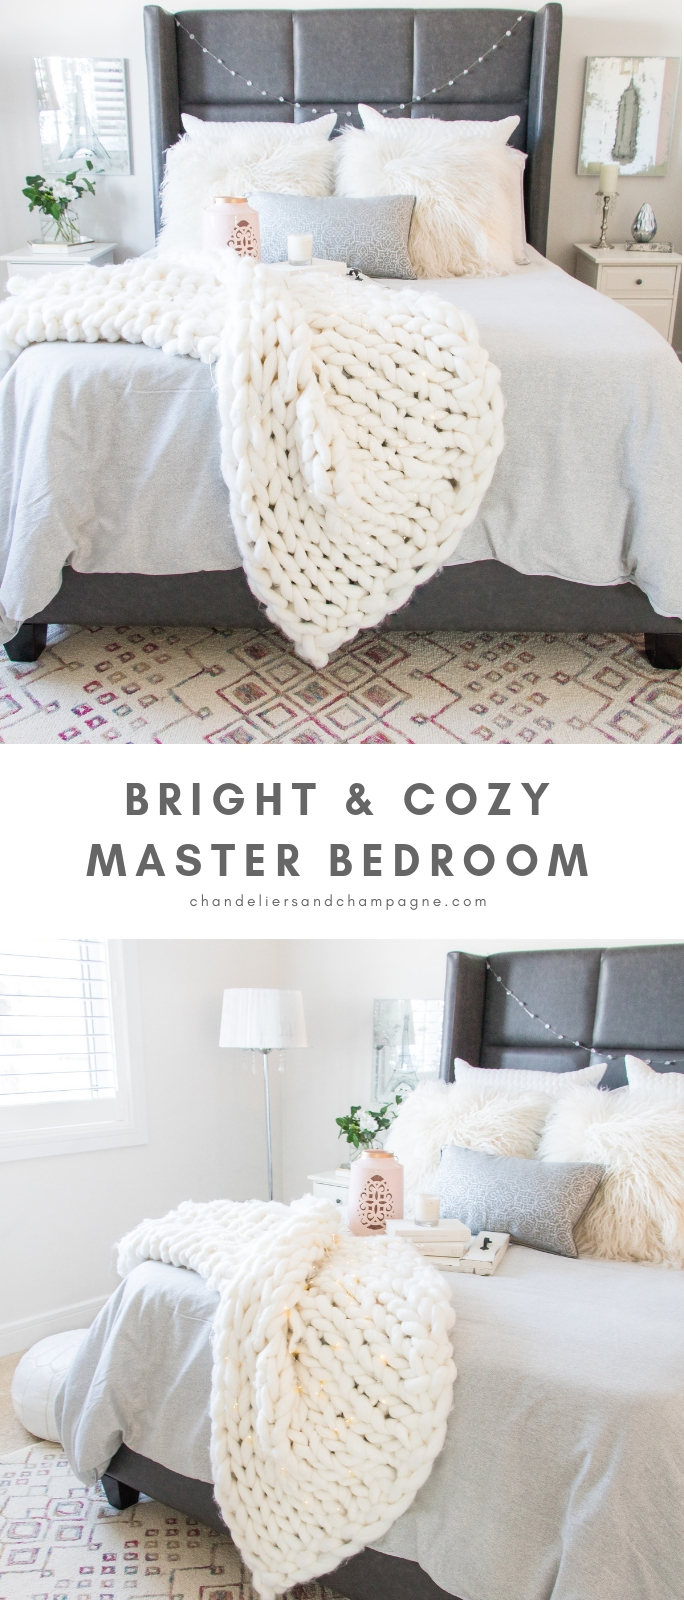 bright and cozy master bedroom reveal featuring leather bed, fairy lights, cozy merino wool blanket and dove gray bedding - gray, white and pink bedroom ideas 